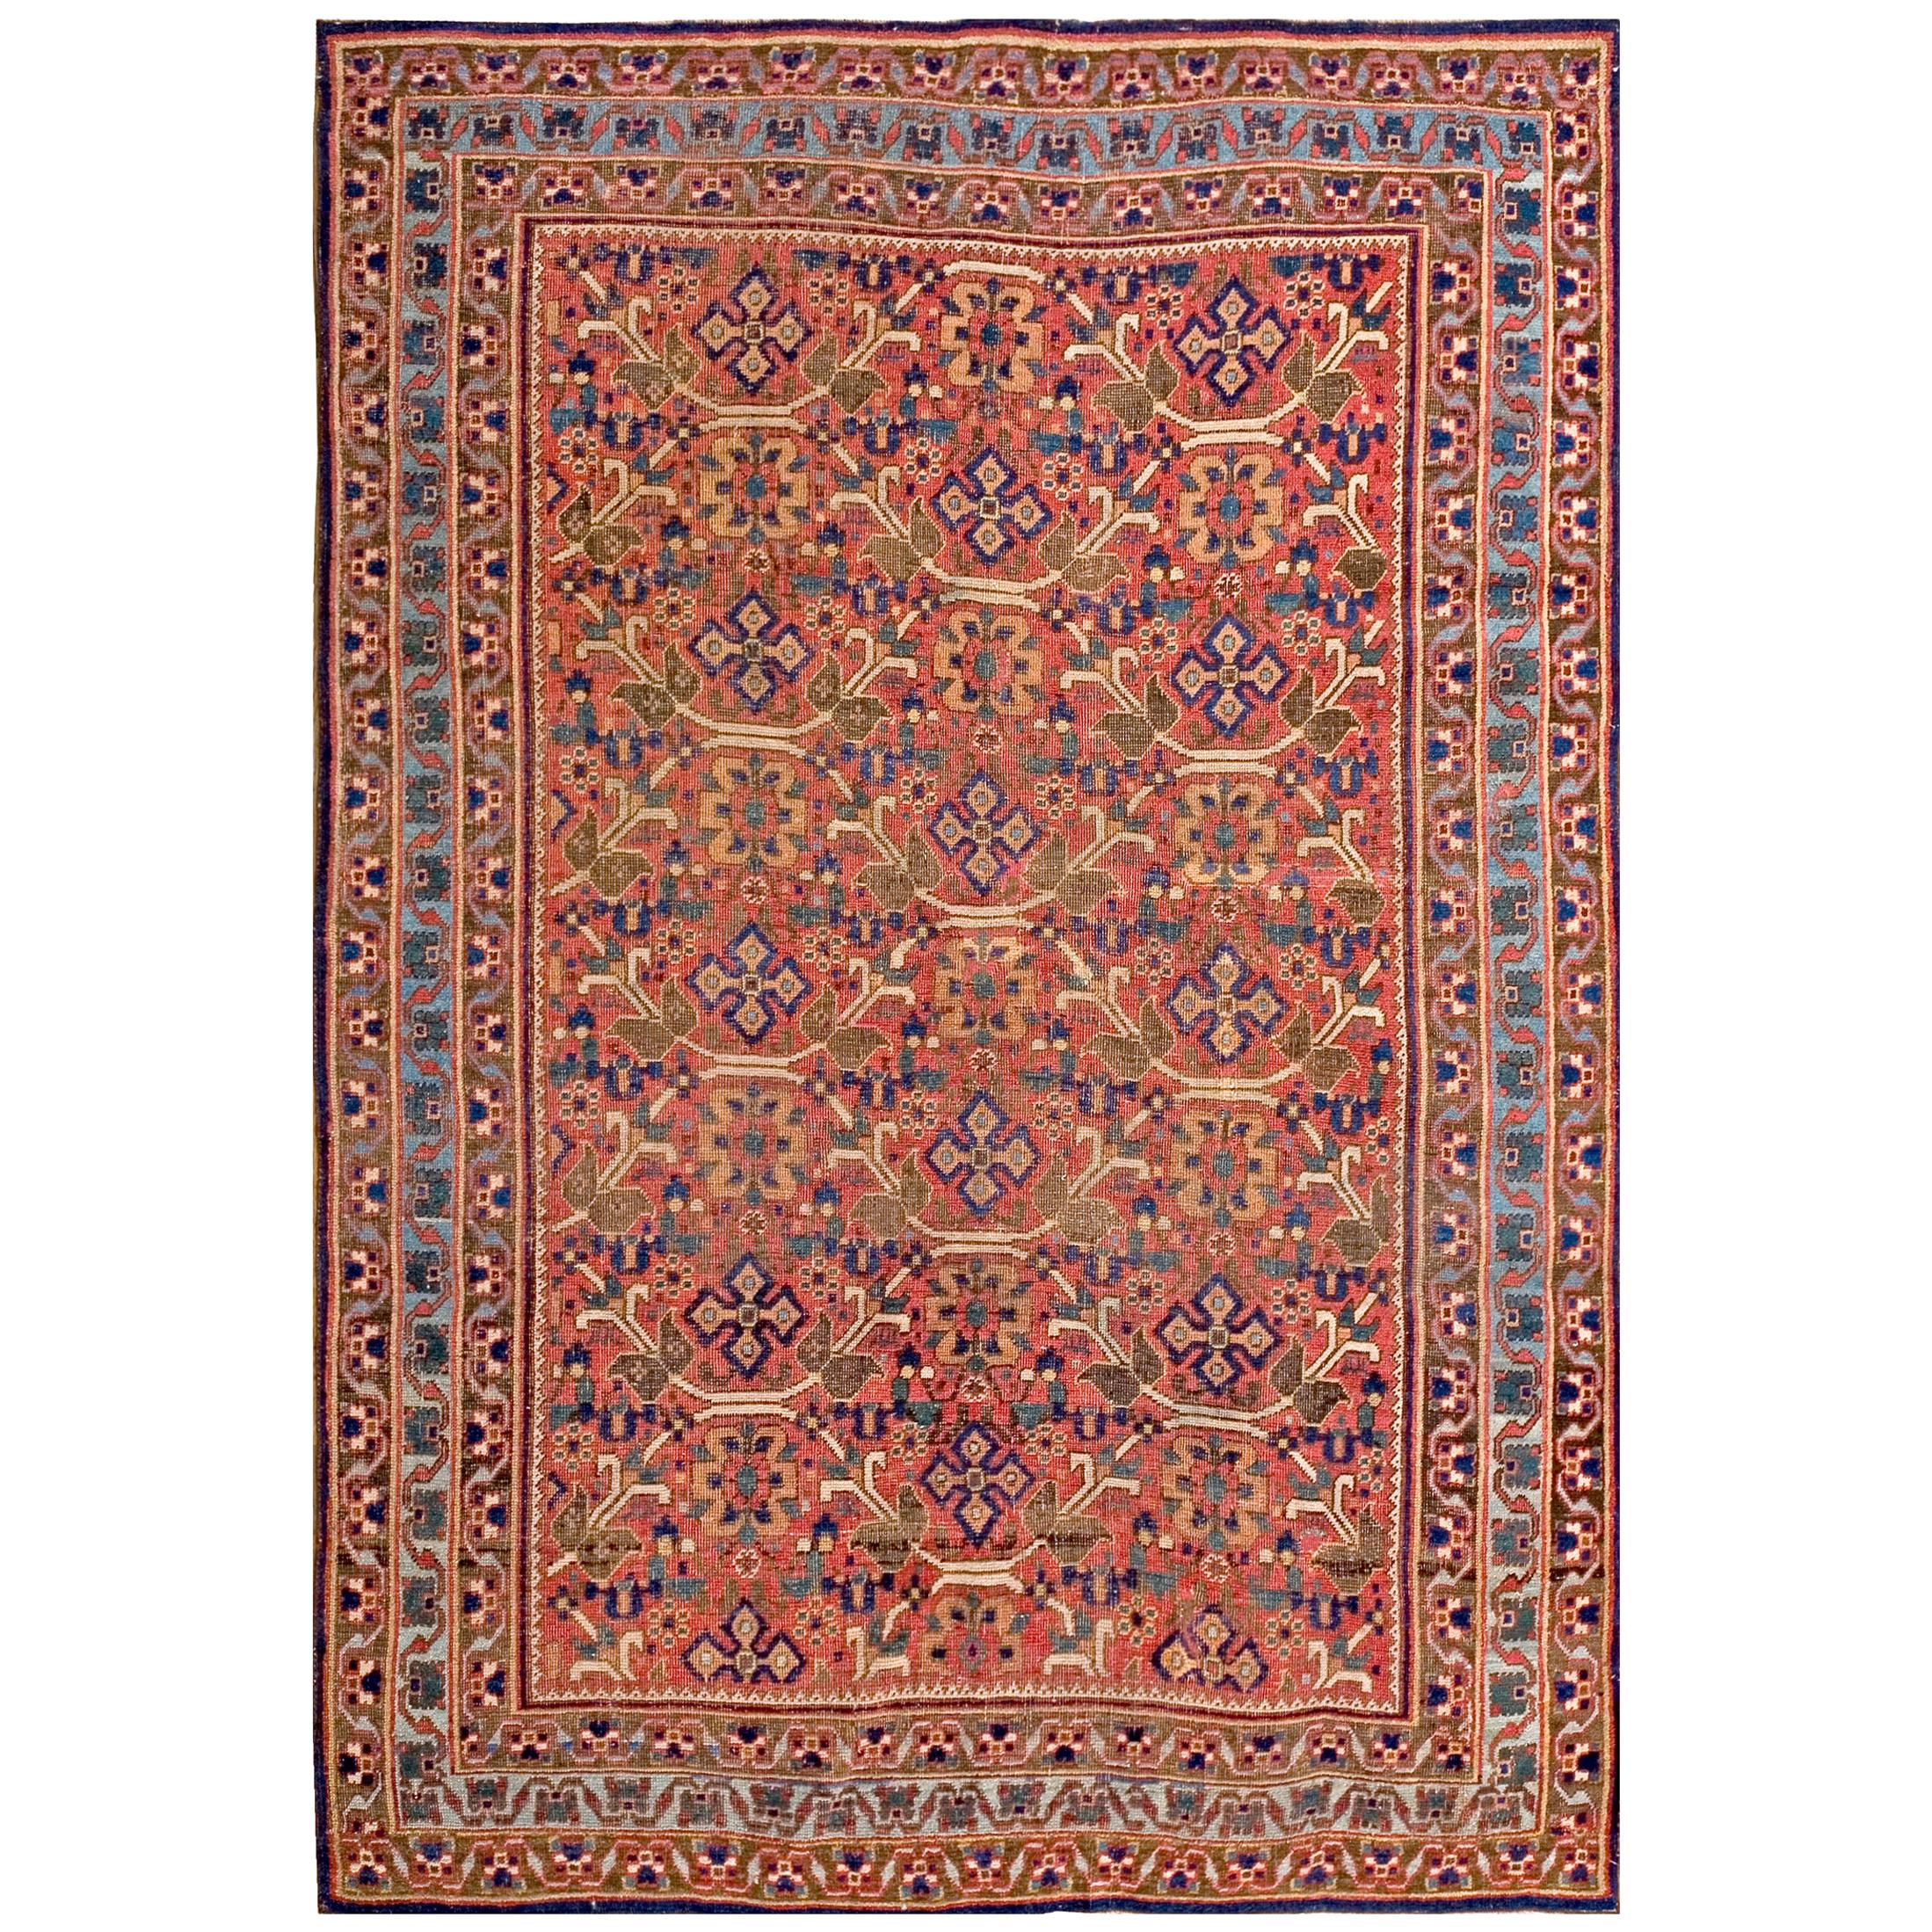 Early 20th Century S.W. Persian Afshar Carpet ( 4'2" x 6' - 127 x 183 )